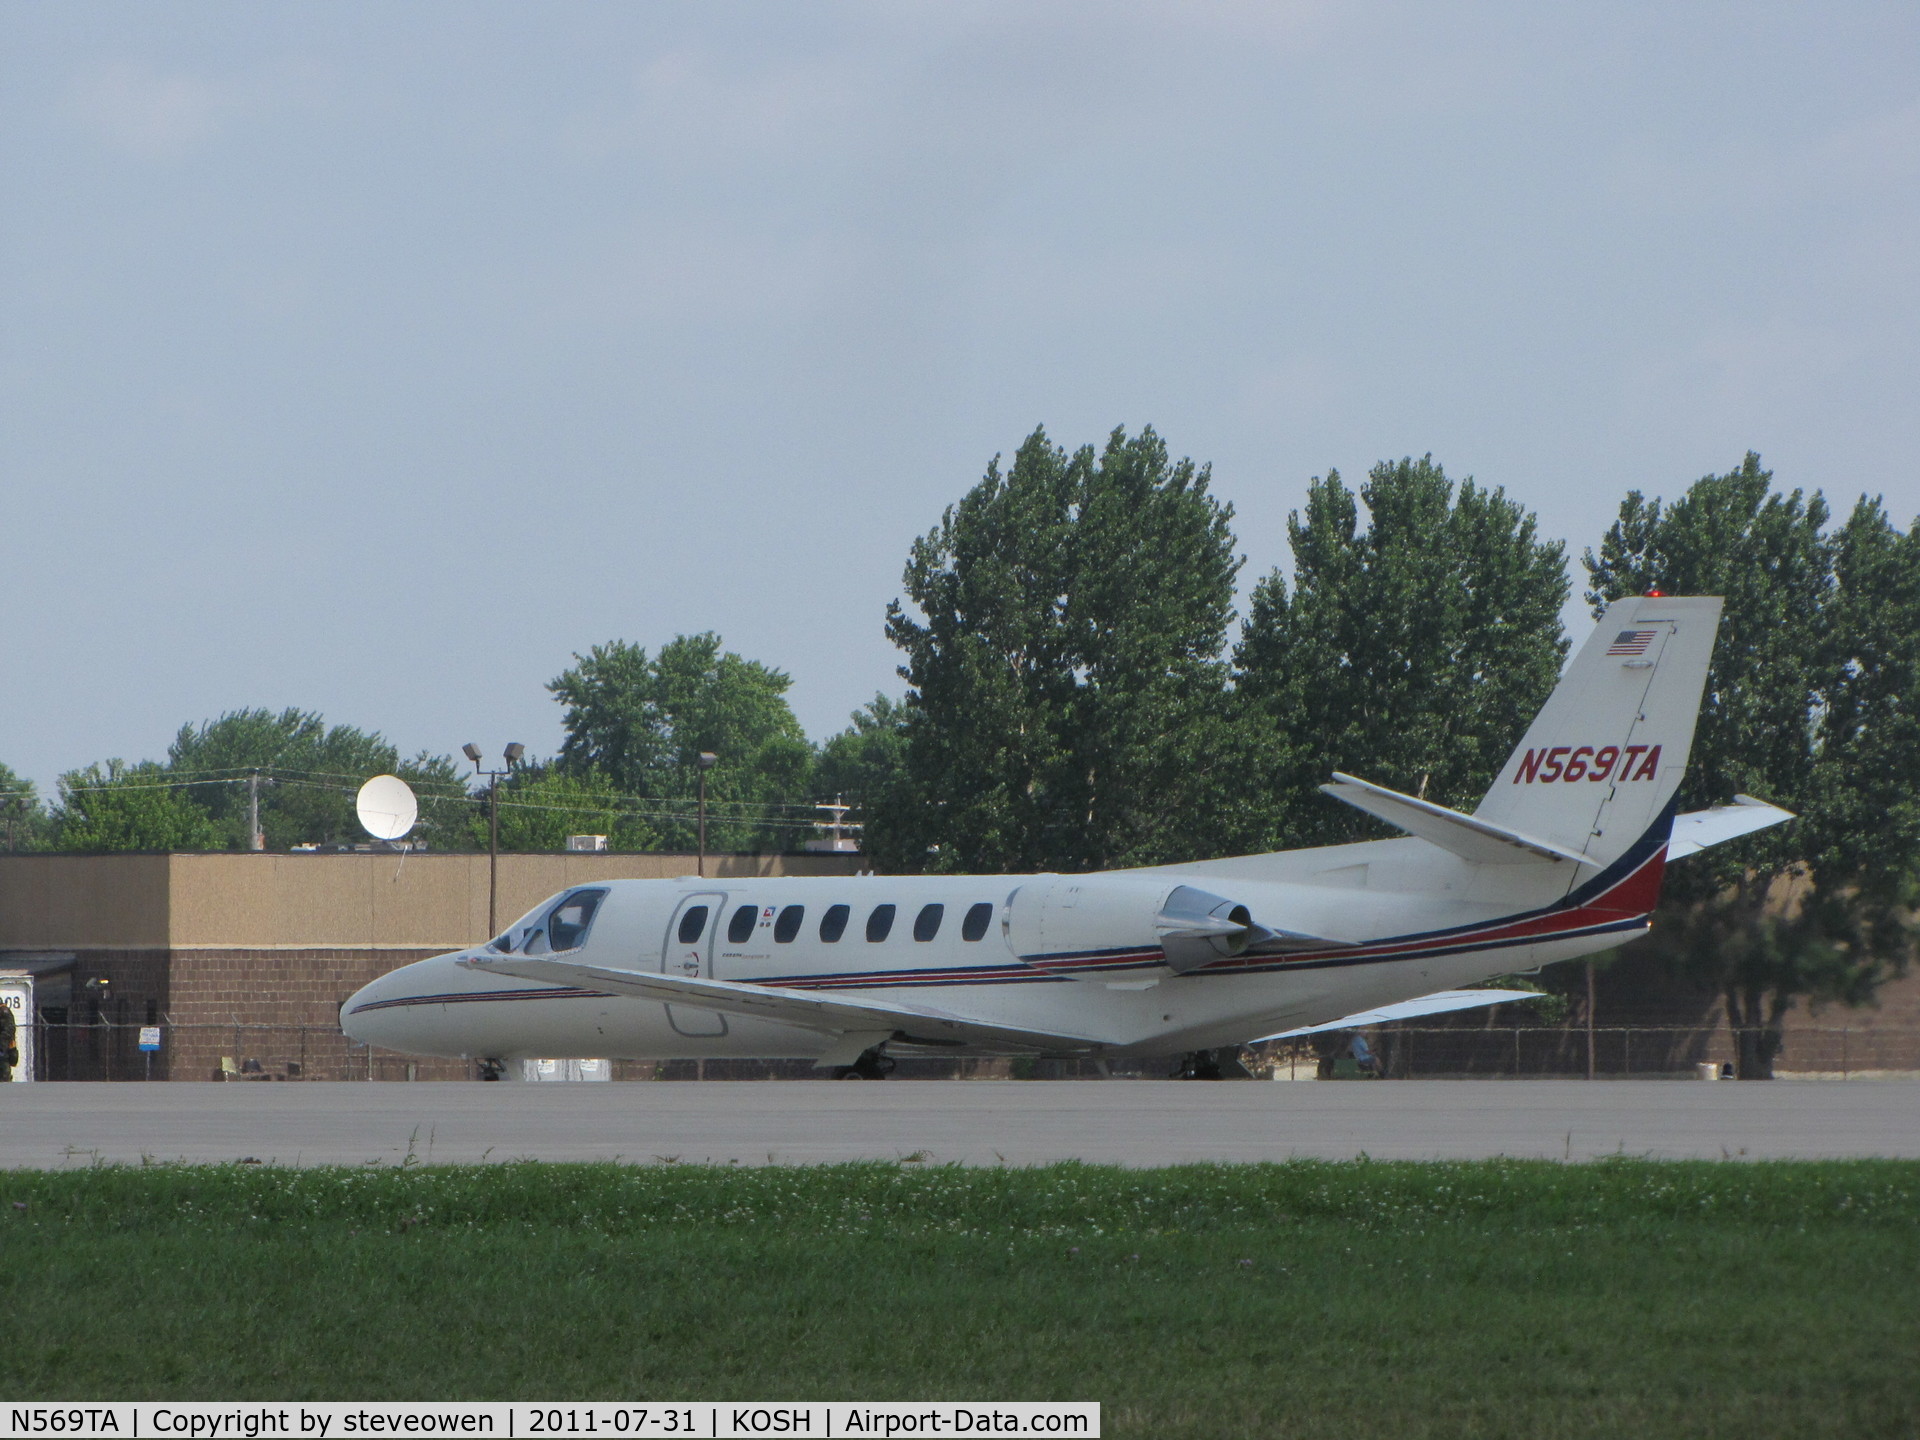 N569TA, 1989 Cessna 560 Citation V C/N 560-0006, Taxing back home after EAA2011.This A/C is based at Oshkosh